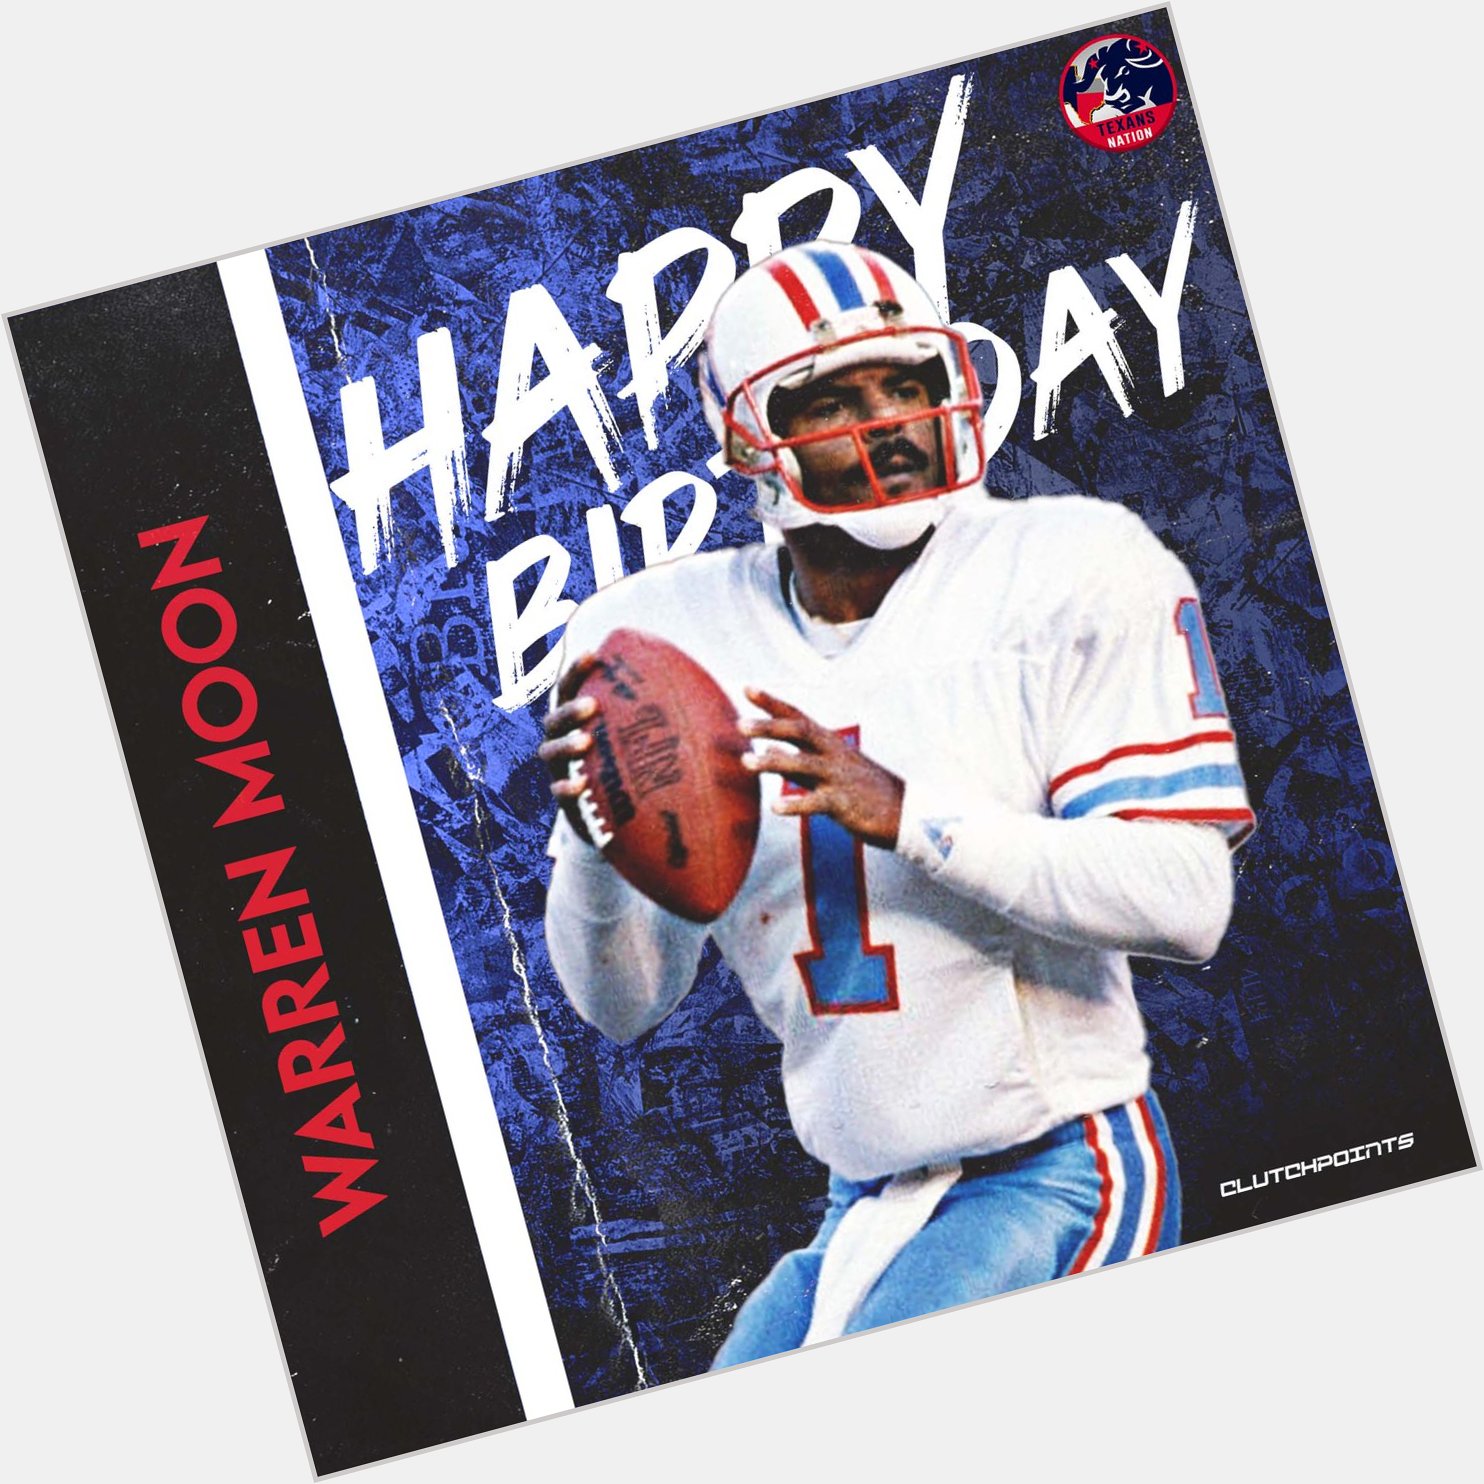 Join Texans Nation in wishing Hall of Famer Warren Moon a happy 65th birthday!  